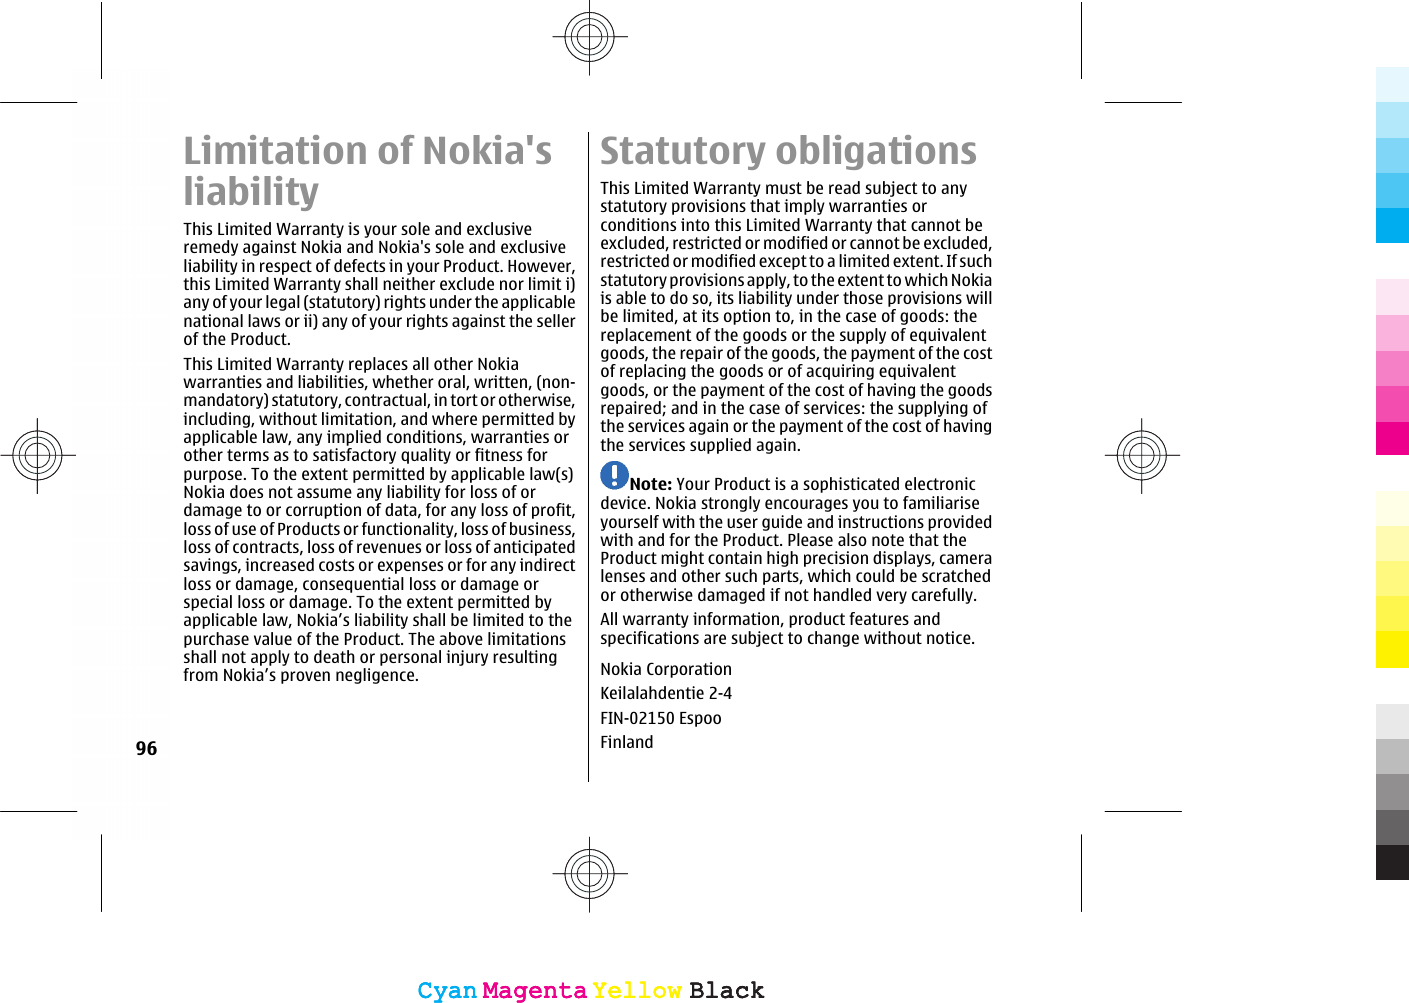 Limitation of Nokia&apos;sliabilityThis Limited Warranty is your sole and exclusiveremedy against Nokia and Nokia&apos;s sole and exclusiveliability in respect of defects in your Product. However,this Limited Warranty shall neither exclude nor limit i)any of your legal (statutory) rights under the applicablenational laws or ii) any of your rights against the sellerof the Product.This Limited Warranty replaces all other Nokiawarranties and liabilities, whether oral, written, (non-mandatory) statutory, contractual, in tort or otherwise,including, without limitation, and where permitted byapplicable law, any implied conditions, warranties orother terms as to satisfactory quality or fitness forpurpose. To the extent permitted by applicable law(s)Nokia does not assume any liability for loss of ordamage to or corruption of data, for any loss of profit,loss of use of Products or functionality, loss of business,loss of contracts, loss of revenues or loss of anticipatedsavings, increased costs or expenses or for any indirectloss or damage, consequential loss or damage orspecial loss or damage. To the extent permitted byapplicable law, Nokia’s liability shall be limited to thepurchase value of the Product. The above limitationsshall not apply to death or personal injury resultingfrom Nokia’s proven negligence.Statutory obligationsThis Limited Warranty must be read subject to anystatutory provisions that imply warranties orconditions into this Limited Warranty that cannot beexcluded, restricted or modified or cannot be excluded,restricted or modified except to a limited extent. If suchstatutory provisions apply, to the extent to which Nokiais able to do so, its liability under those provisions willbe limited, at its option to, in the case of goods: thereplacement of the goods or the supply of equivalentgoods, the repair of the goods, the payment of the costof replacing the goods or of acquiring equivalentgoods, or the payment of the cost of having the goodsrepaired; and in the case of services: the supplying ofthe services again or the payment of the cost of havingthe services supplied again.Note: Your Product is a sophisticated electronicdevice. Nokia strongly encourages you to familiariseyourself with the user guide and instructions providedwith and for the Product. Please also note that theProduct might contain high precision displays, cameralenses and other such parts, which could be scratchedor otherwise damaged if not handled very carefully.All warranty information, product features andspecifications are subject to change without notice.Nokia CorporationKeilalahdentie 2-4FIN-02150 EspooFinland96CyanCyanMagentaMagentaYellowYellowBlackBlackCyanCyanMagentaMagentaYellowYellowBlackBlack